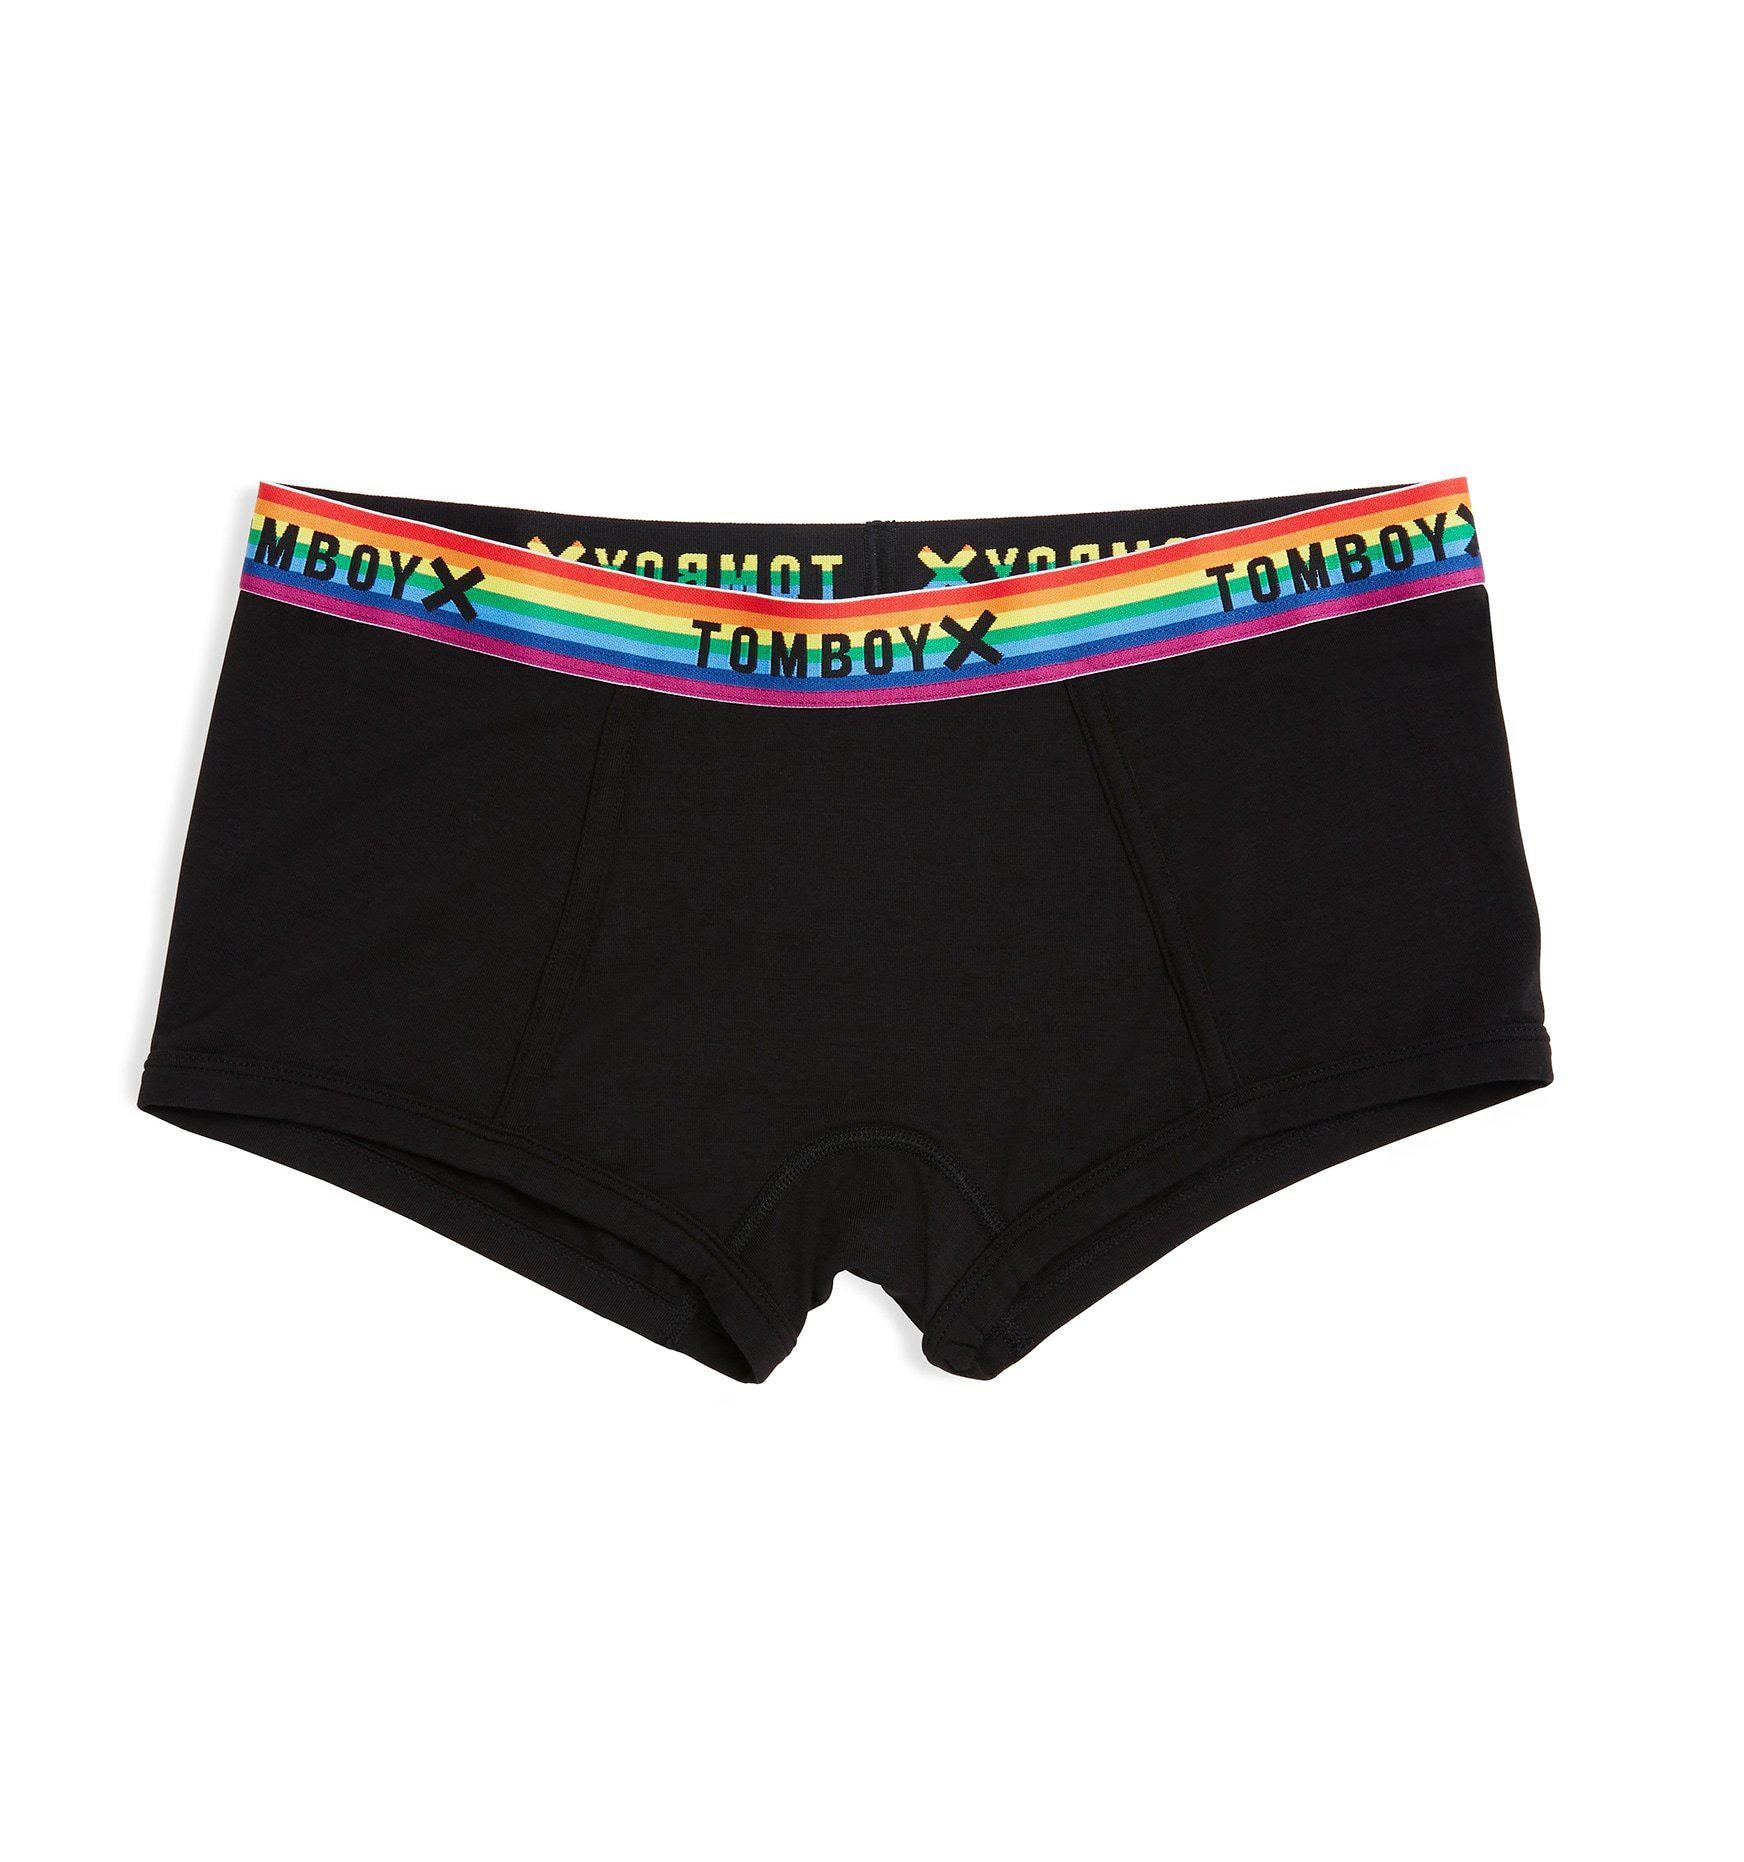 TomboyX Boy Shorts Underwear, Micromodal Stretchy and Soft All